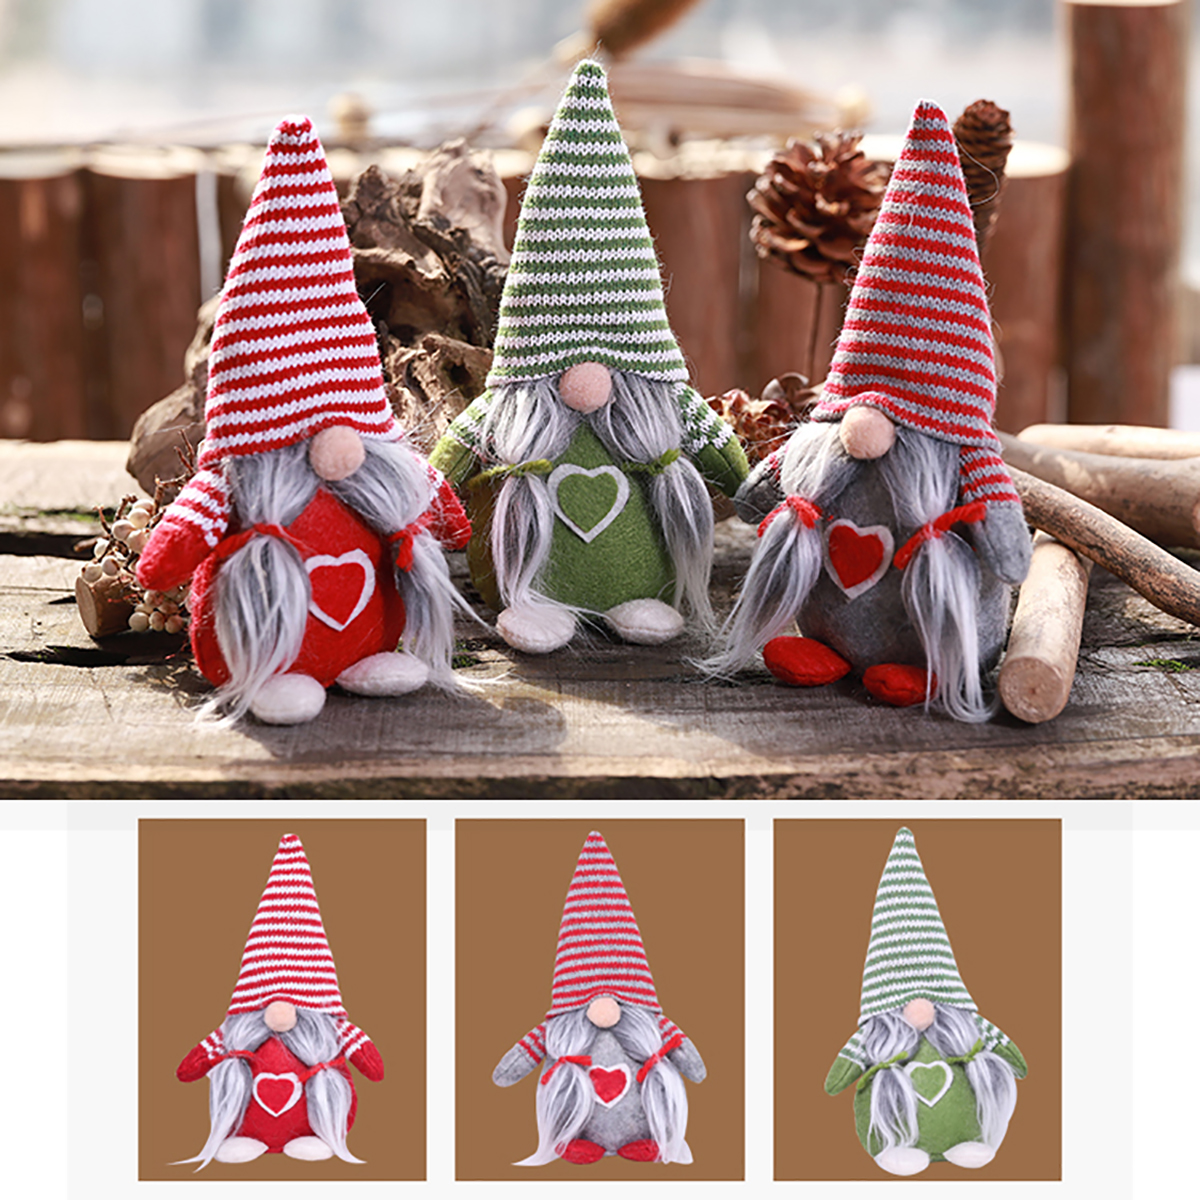 Non-Woven-Hat-With-Heart-Handmade-Gnome-Santa-Christmas-Figurines-Ornament-Holiday-Table-Decorations-1634099-3